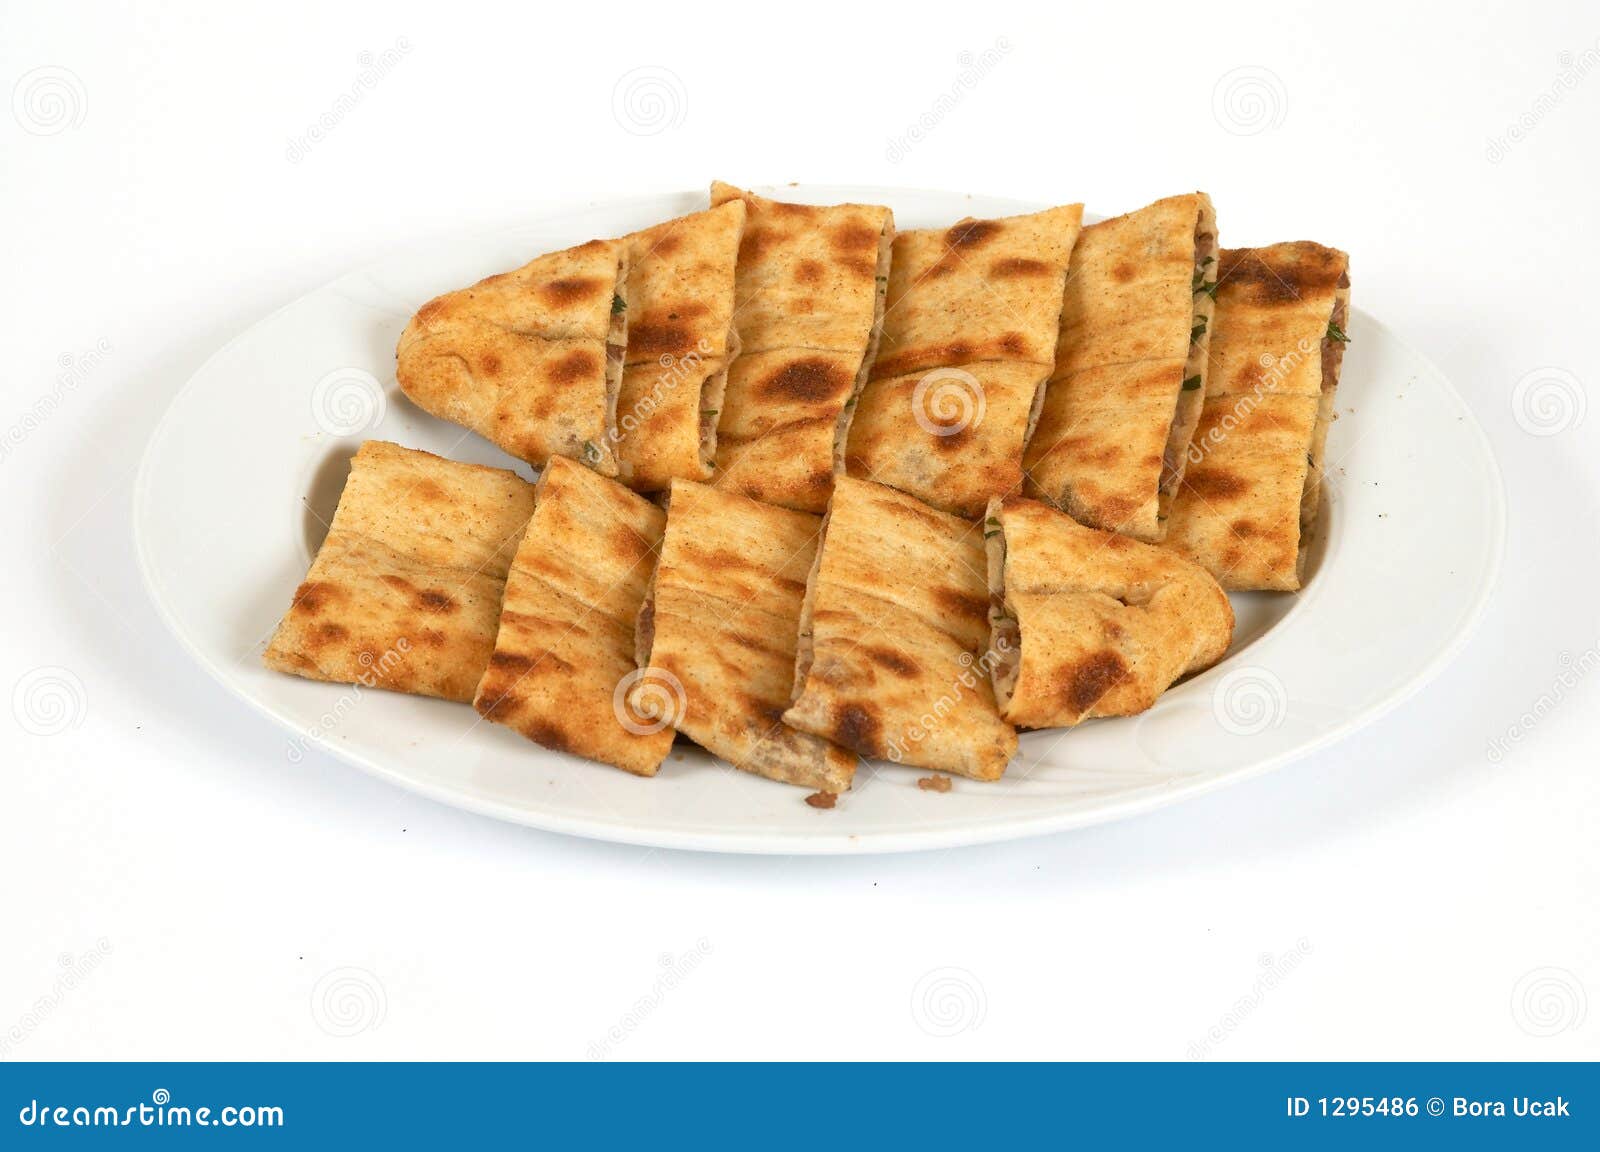 Doner pide. Turkish special pide with meat